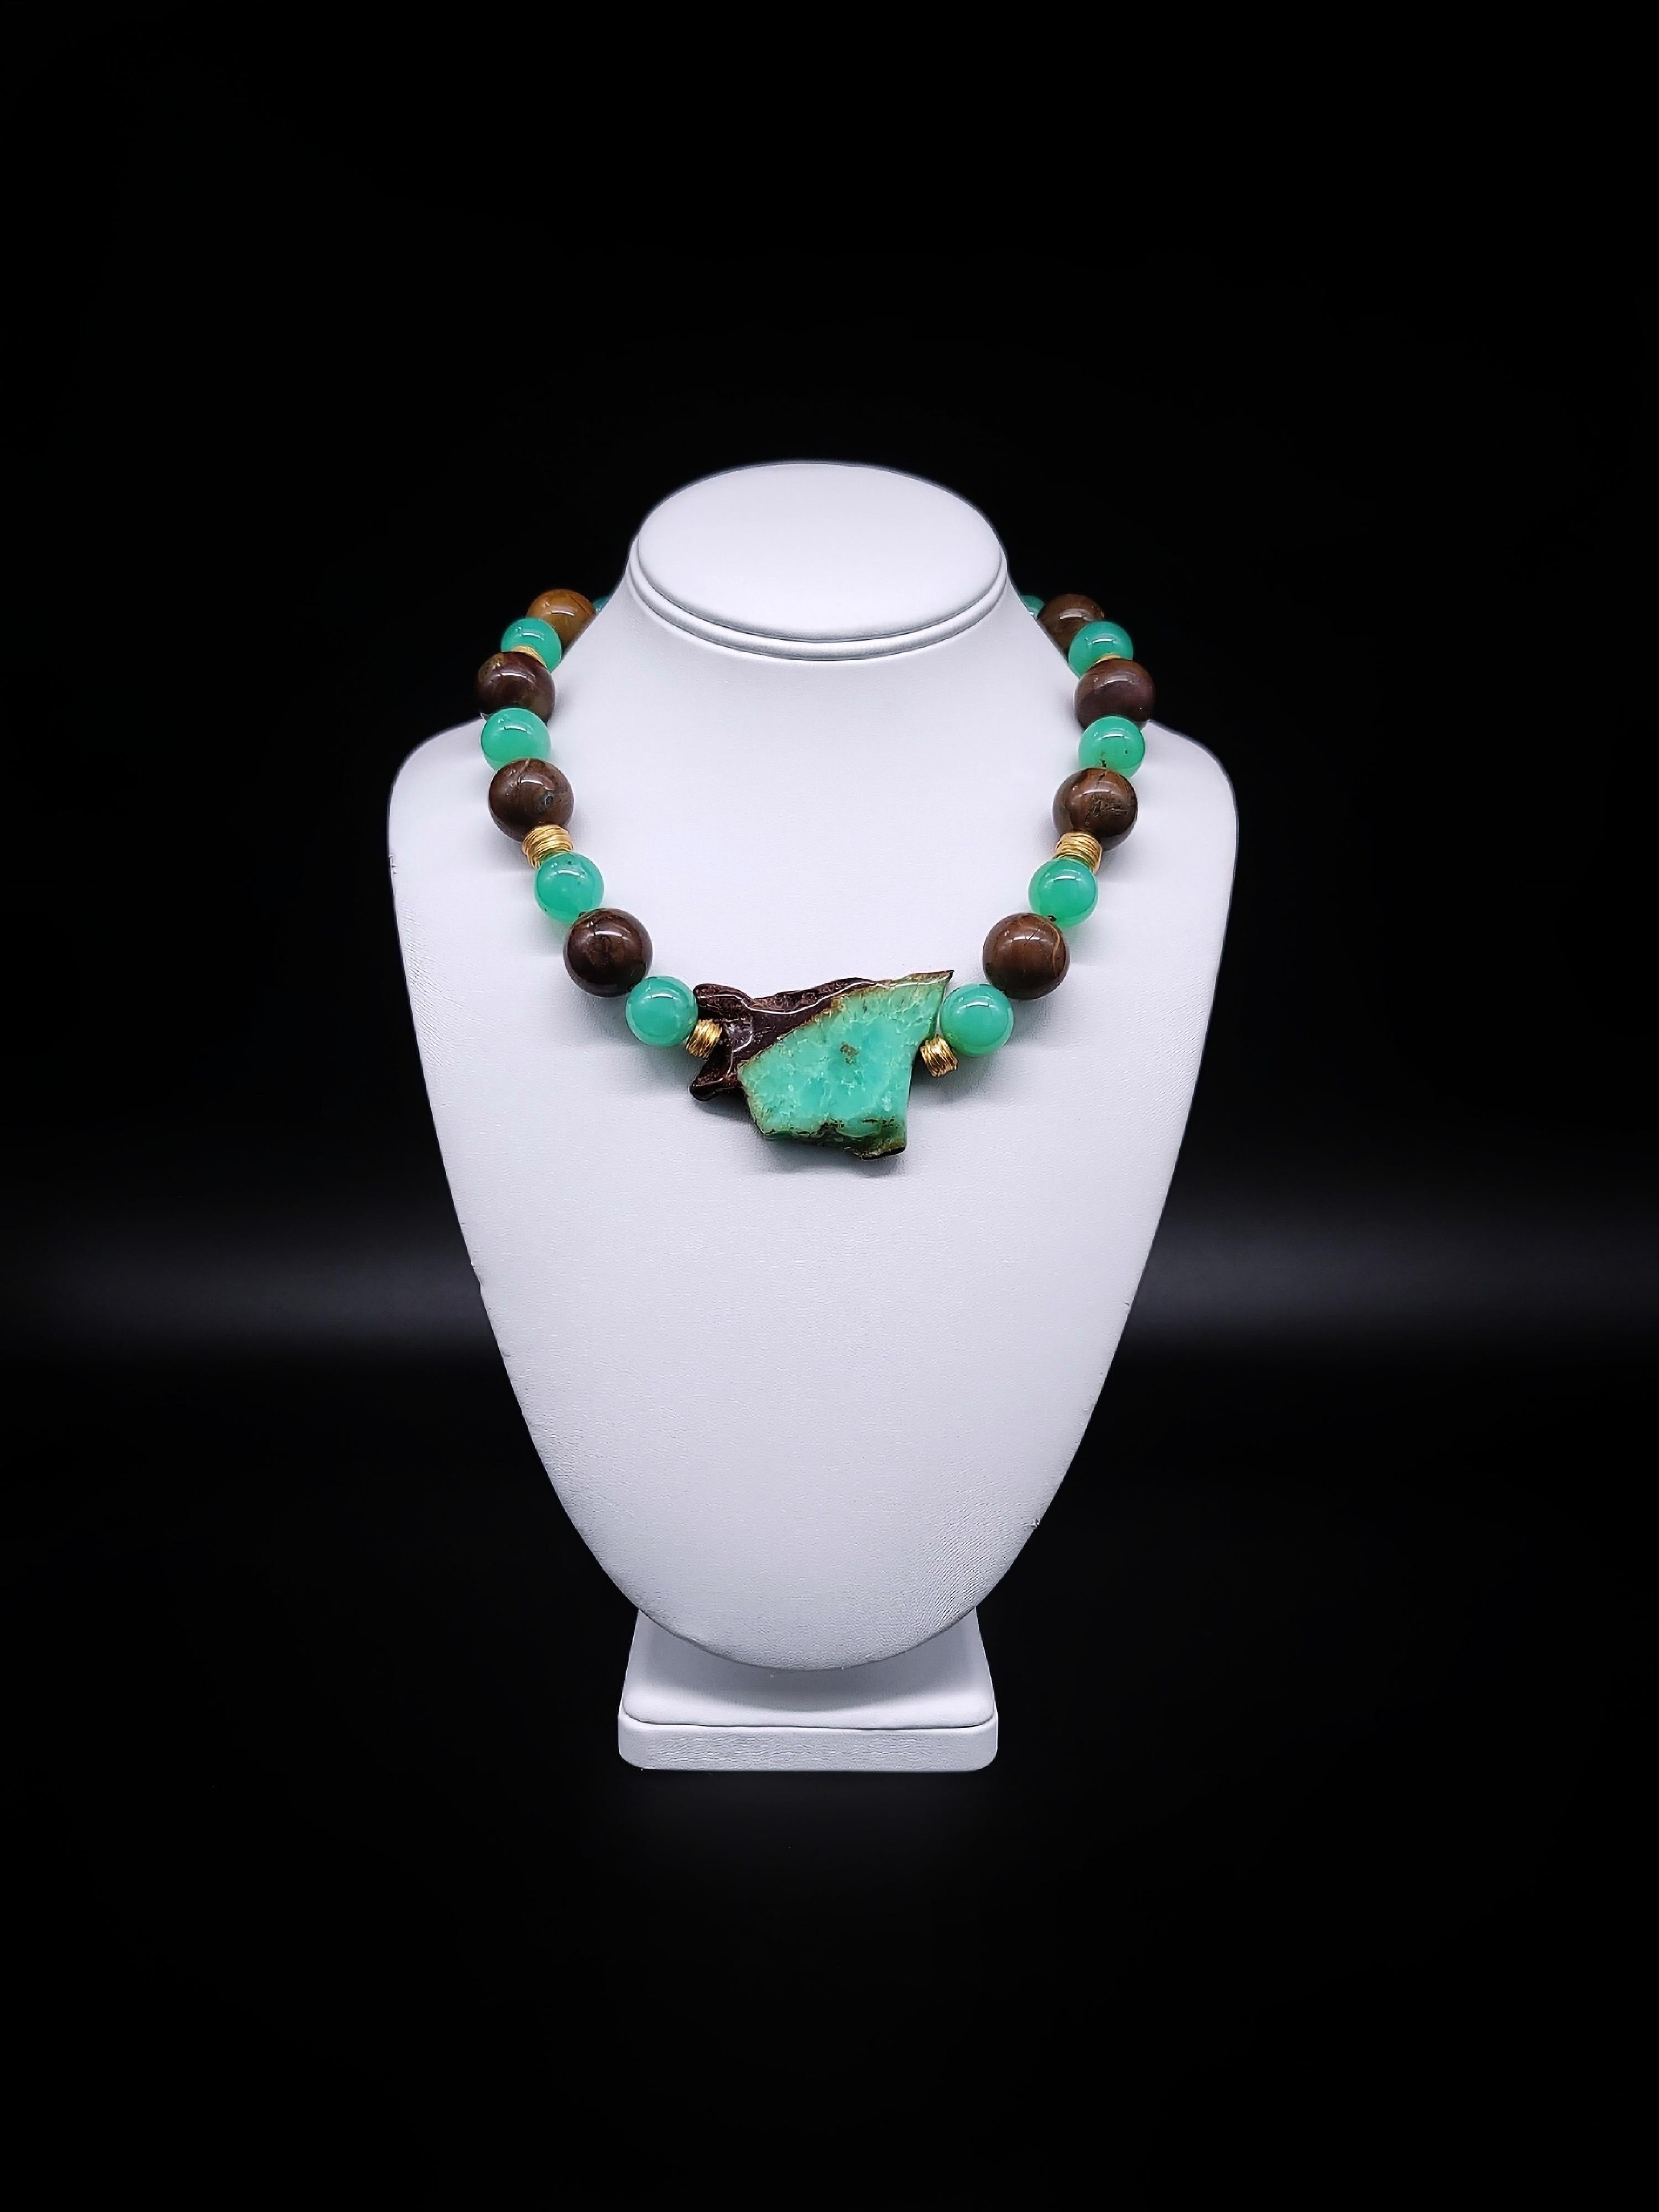 One-of-a-Kind
Mixed with Tiger’s eye beads. The beads surround a slice of polished Chrysoprase with a corner of dark brown. An exclusion caused by the expected bit of nickel found in the mine. Hand made Vermeil spacers and clasp with a Tiger's eye